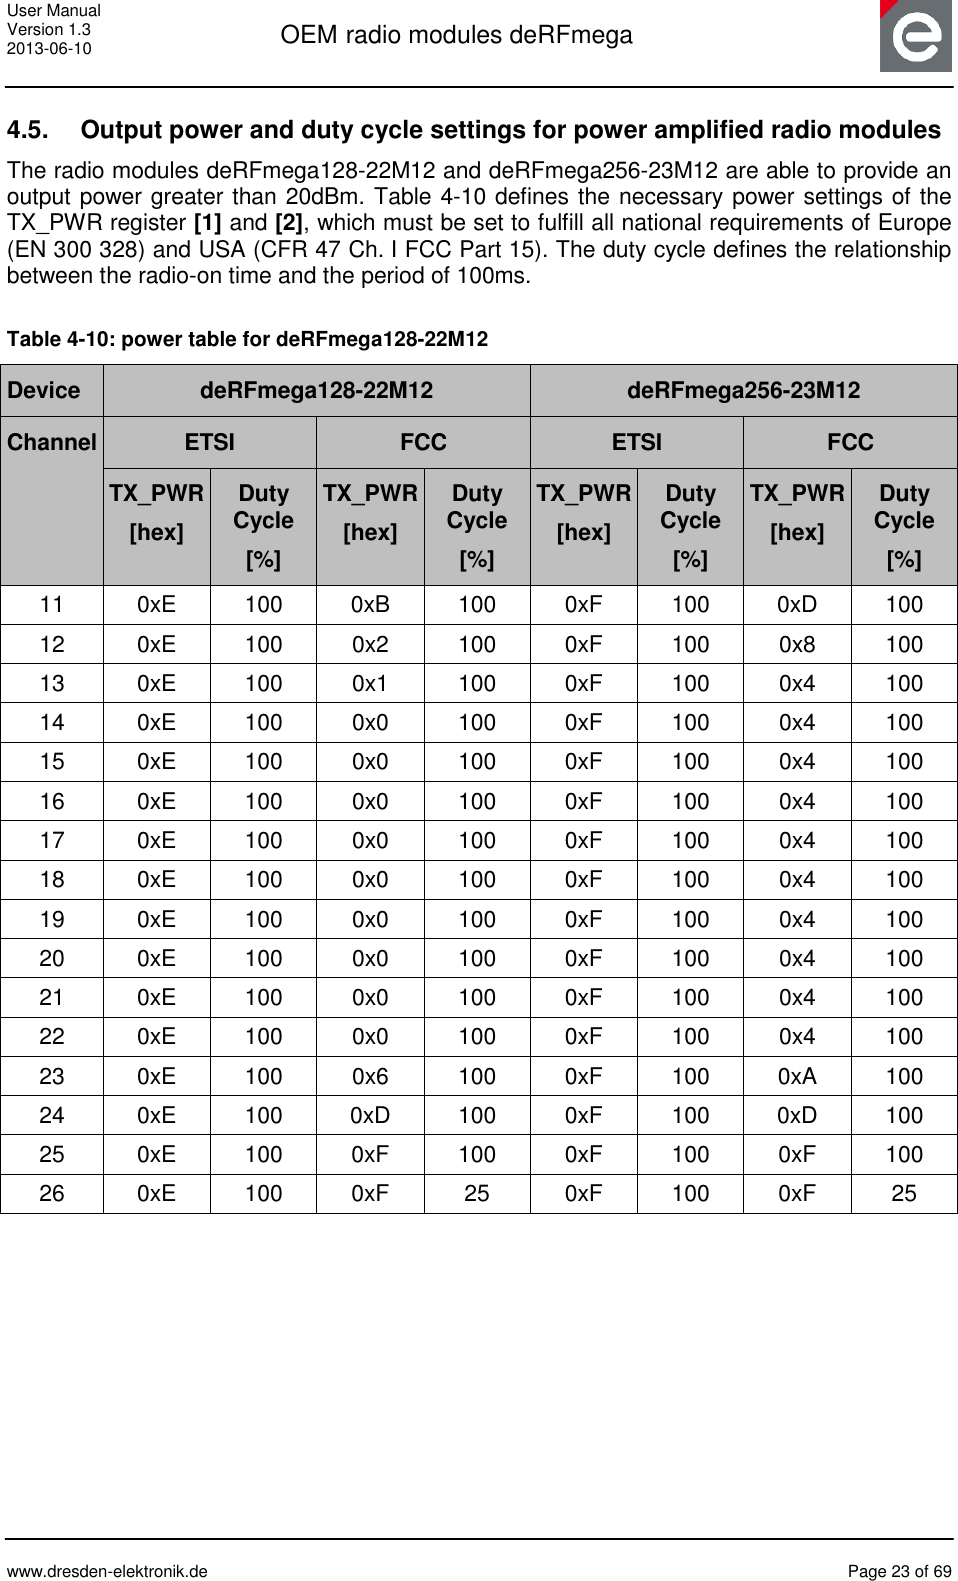 User Manual Version 1.3 2013-06-10  OEM radio modules deRFmega      www.dresden-elektronik.de  Page 23 of 69  4.5.  Output power and duty cycle settings for power amplified radio modules The radio modules deRFmega128-22M12 and deRFmega256-23M12 are able to provide an output power greater than 20dBm. Table 4-10 defines the necessary power settings of the TX_PWR register [1] and [2], which must be set to fulfill all national requirements of Europe (EN 300 328) and USA (CFR 47 Ch. I FCC Part 15). The duty cycle defines the relationship between the radio-on time and the period of 100ms.  Table 4-10: power table for deRFmega128-22M12 Device deRFmega128-22M12 deRFmega256-23M12 Channel ETSI FCC ETSI FCC TX_PWR [hex] Duty Cycle [%] TX_PWR [hex] Duty Cycle [%] TX_PWR [hex] Duty Cycle [%] TX_PWR [hex] Duty Cycle [%] 11 0xE 100 0xB 100 0xF 100 0xD 100 12 0xE 100 0x2 100 0xF 100 0x8 100 13 0xE 100 0x1 100 0xF 100 0x4 100 14 0xE 100 0x0 100 0xF 100 0x4 100 15 0xE 100 0x0 100 0xF 100 0x4 100 16 0xE 100 0x0 100 0xF 100 0x4 100 17 0xE 100 0x0 100 0xF 100 0x4 100 18 0xE 100 0x0 100 0xF 100 0x4 100 19 0xE 100 0x0 100 0xF 100 0x4 100 20 0xE 100 0x0 100 0xF 100 0x4 100 21 0xE 100 0x0 100 0xF 100 0x4 100 22 0xE 100 0x0 100 0xF 100 0x4 100 23 0xE 100 0x6 100 0xF 100 0xA 100 24 0xE 100 0xD 100 0xF 100 0xD 100 25 0xE 100 0xF 100 0xF 100 0xF 100 26 0xE 100 0xF 25 0xF 100 0xF 25    